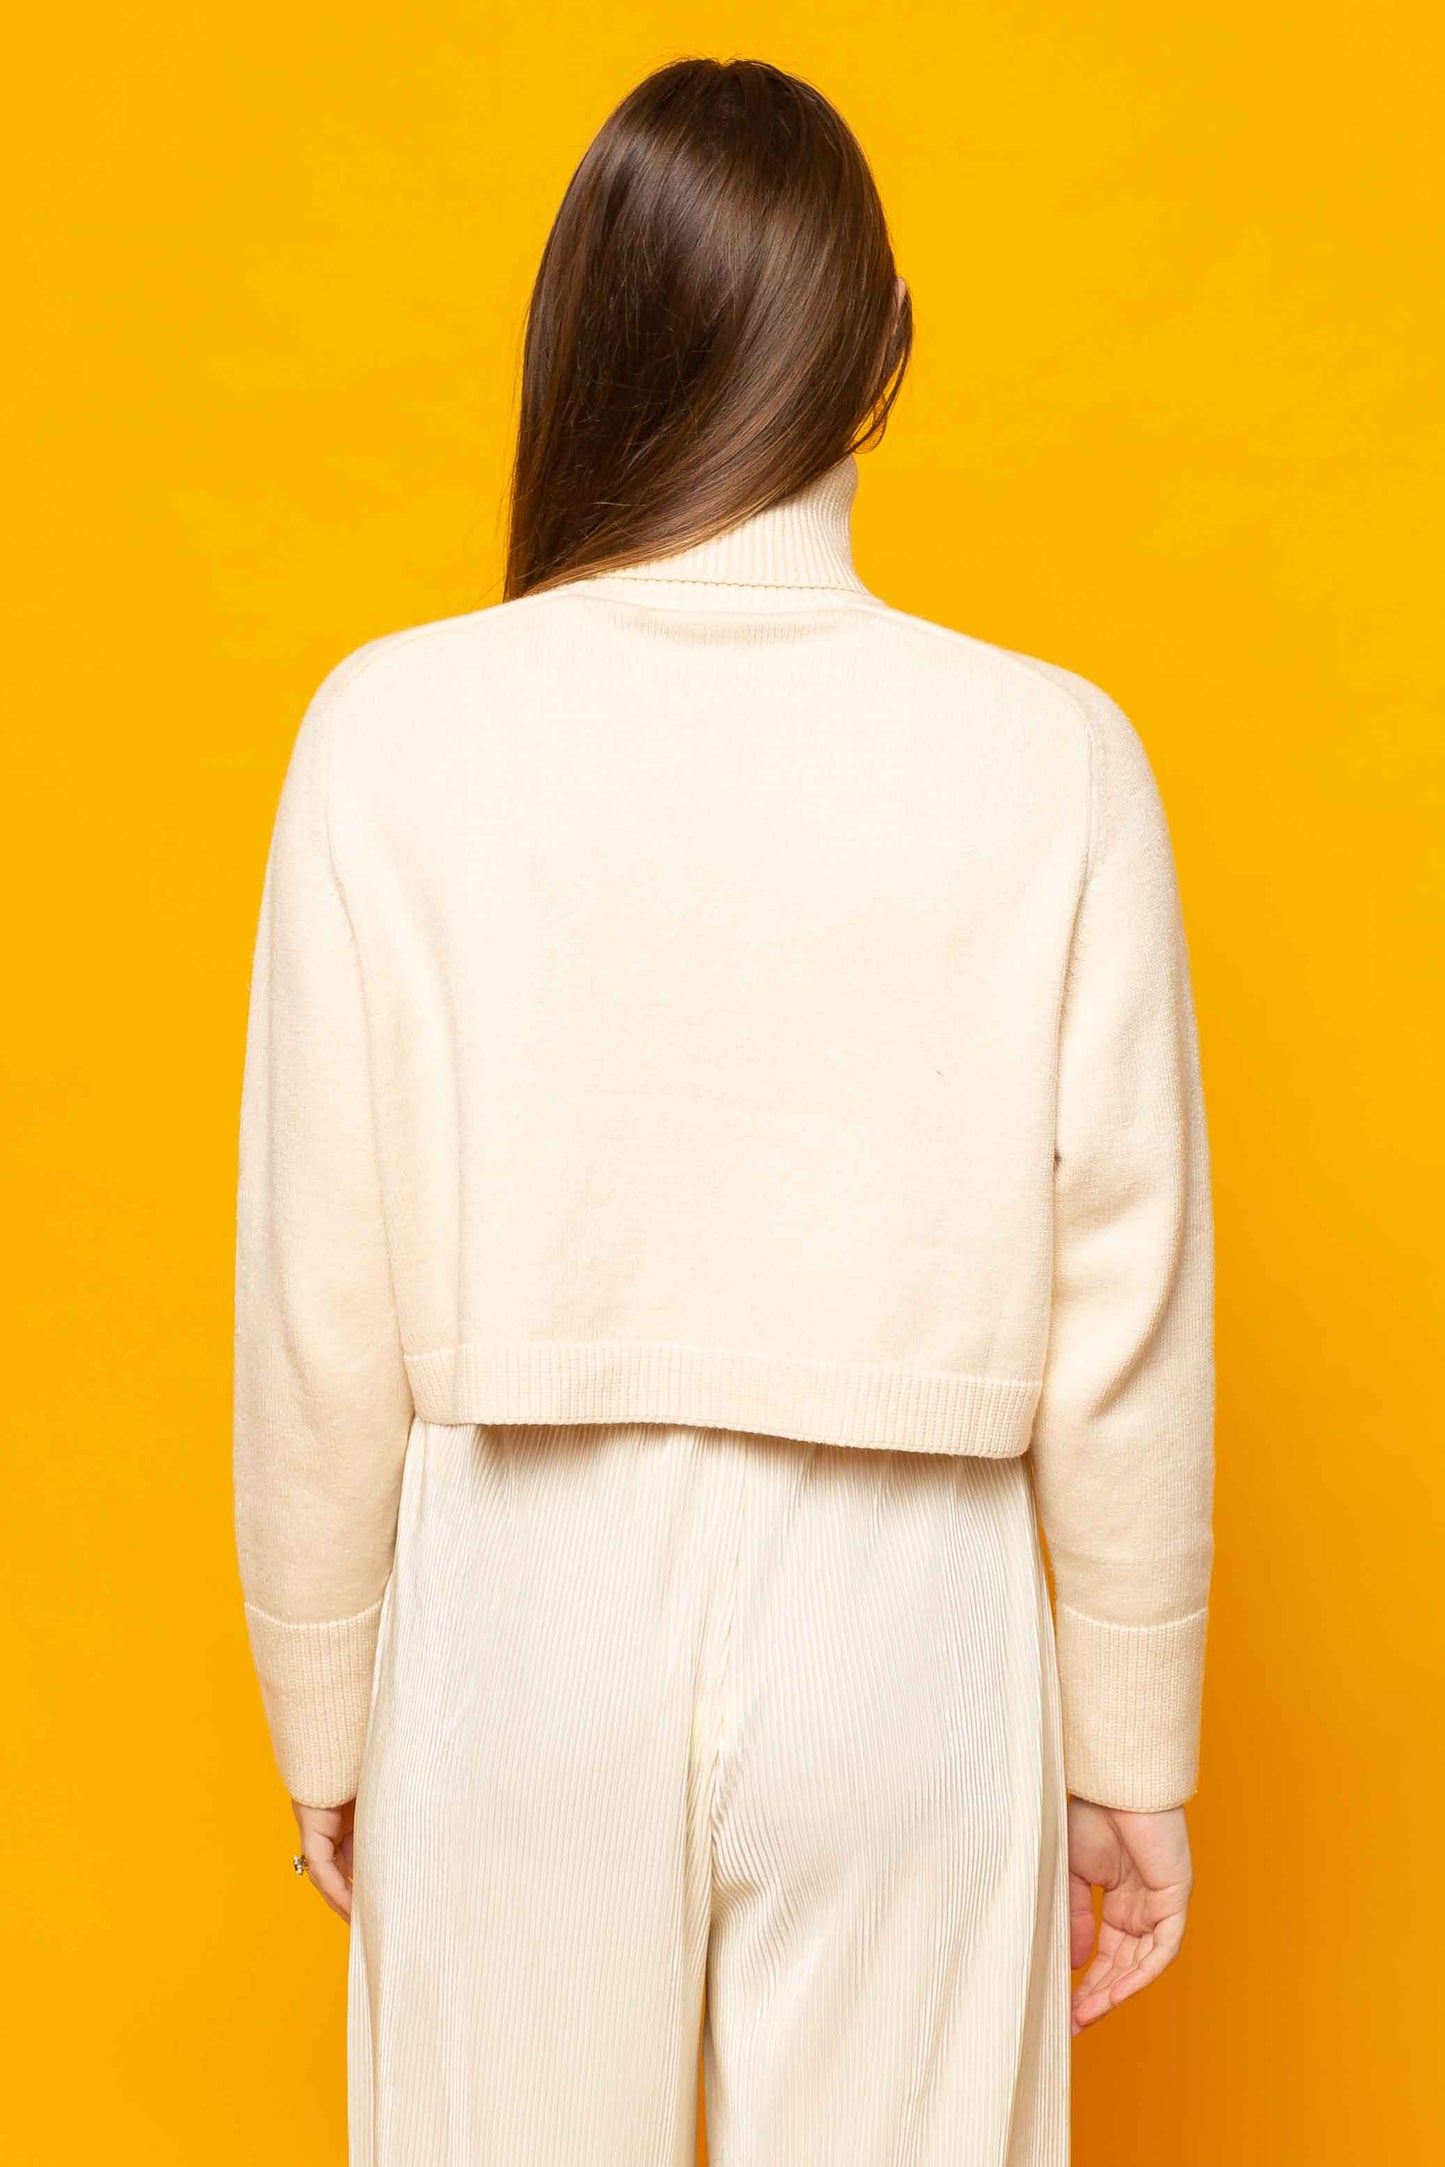 This is The Remix Jumper QUE SERA, SERA - High Neck Cropped Jumper In Cream